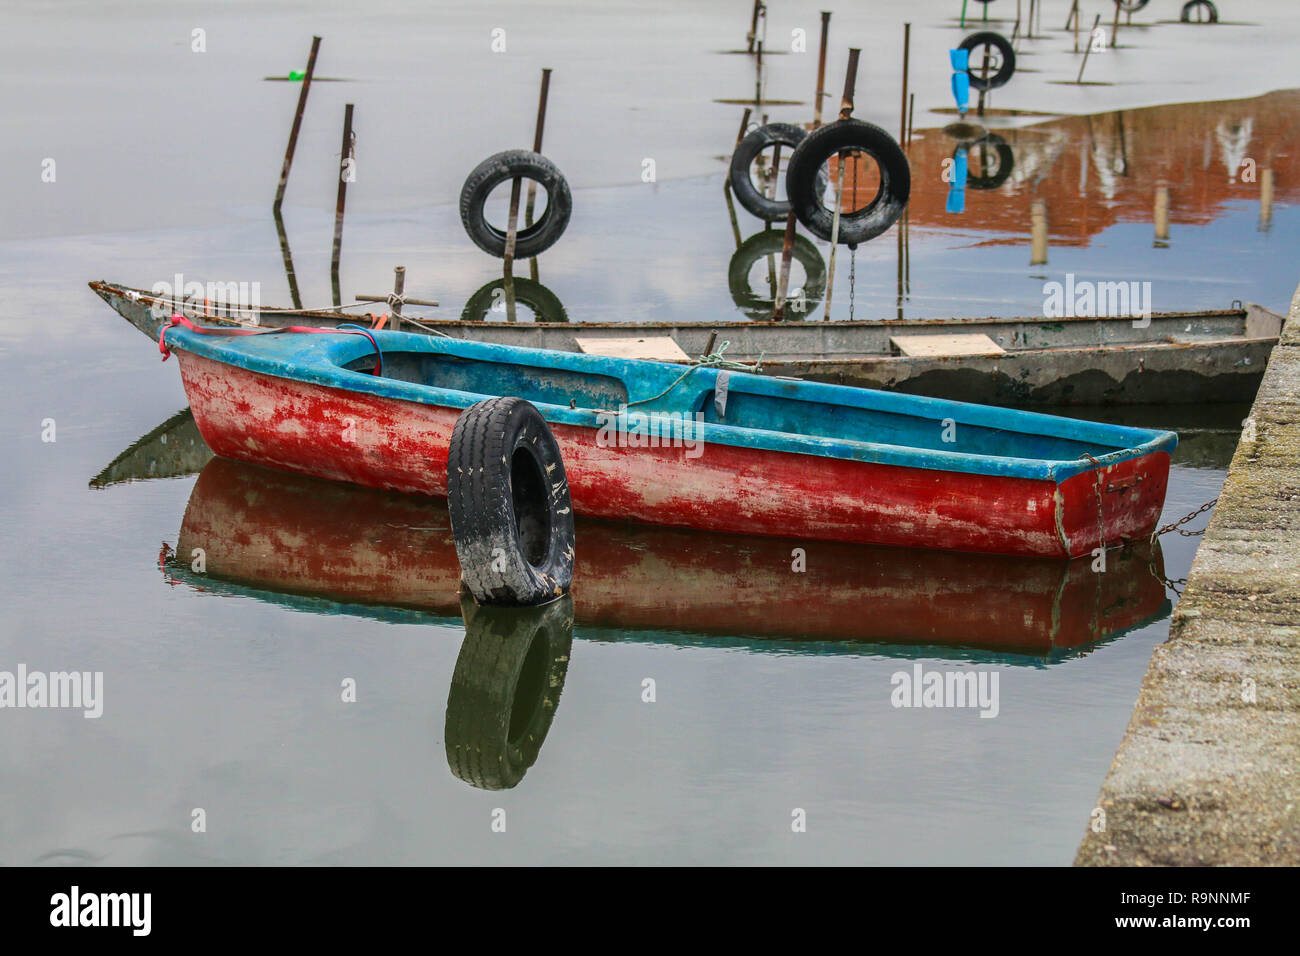 https://c8.alamy.com/comp/R9NNMF/small-old-wood-fishing-boats-floating-on-the-water-they-are-standing-on-the-small-dock-R9NNMF.jpg